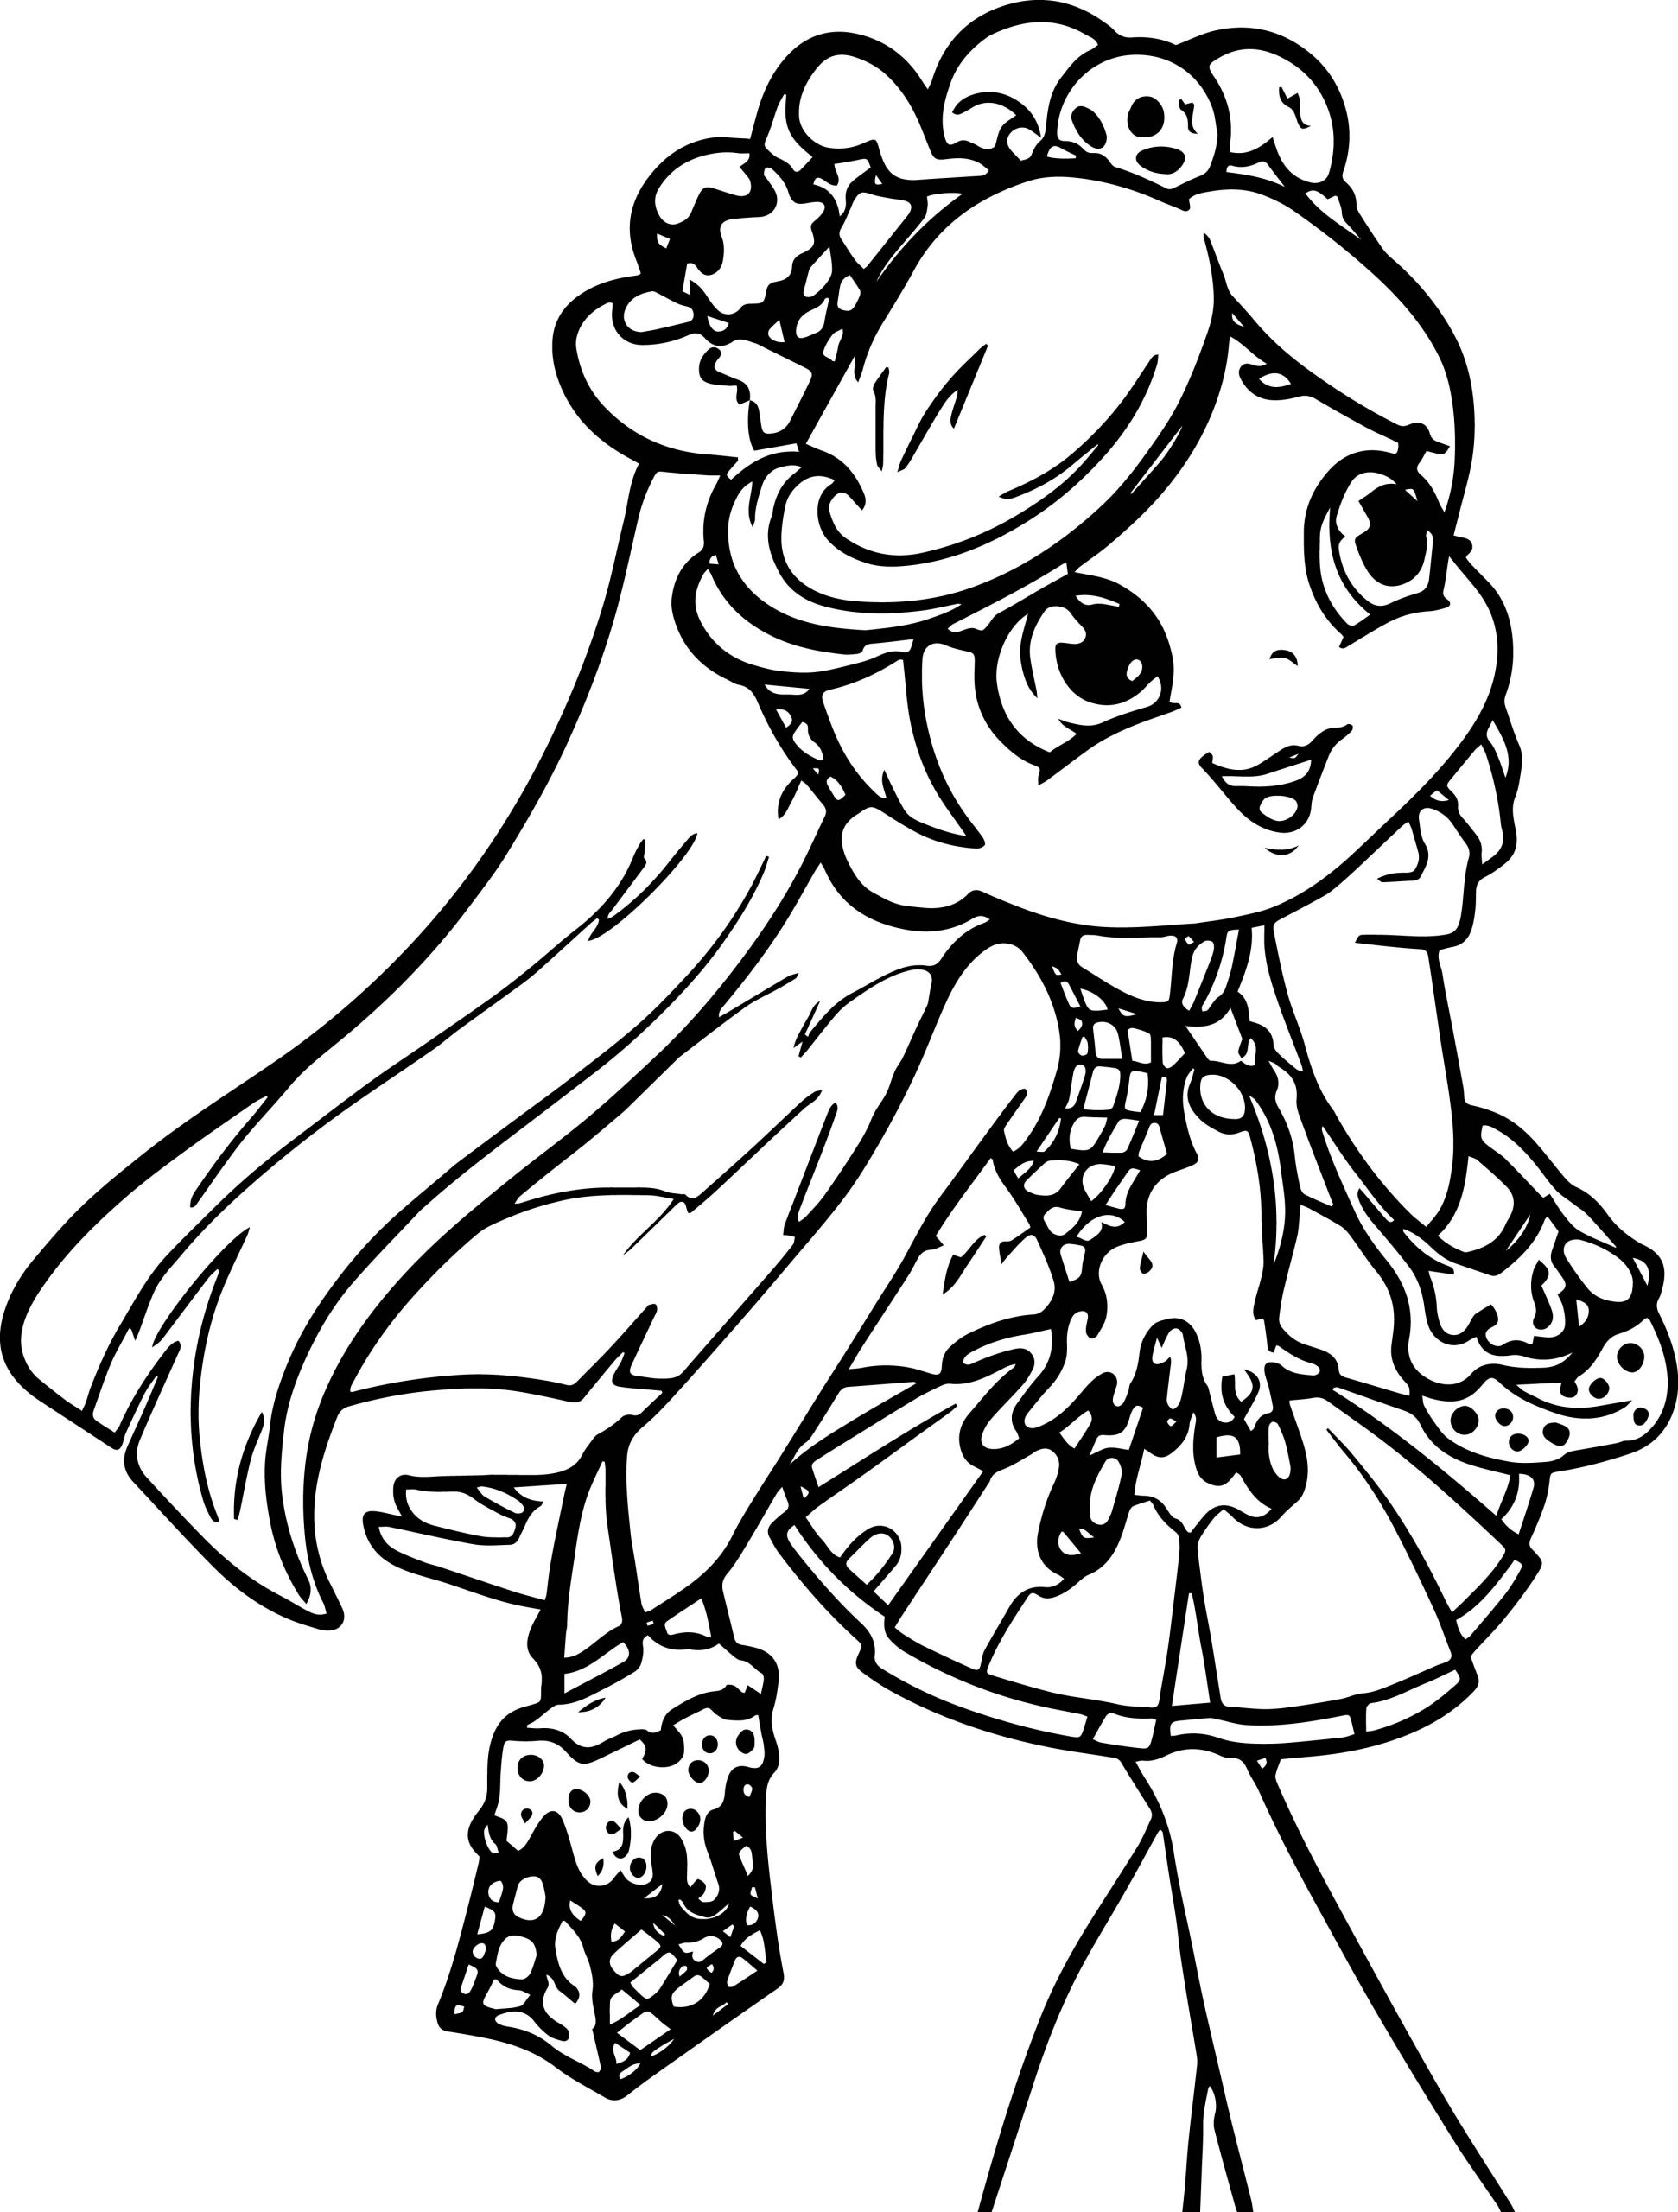 Shopkins Girls Coloring Pages
 Shopkins Girl Coloring Page